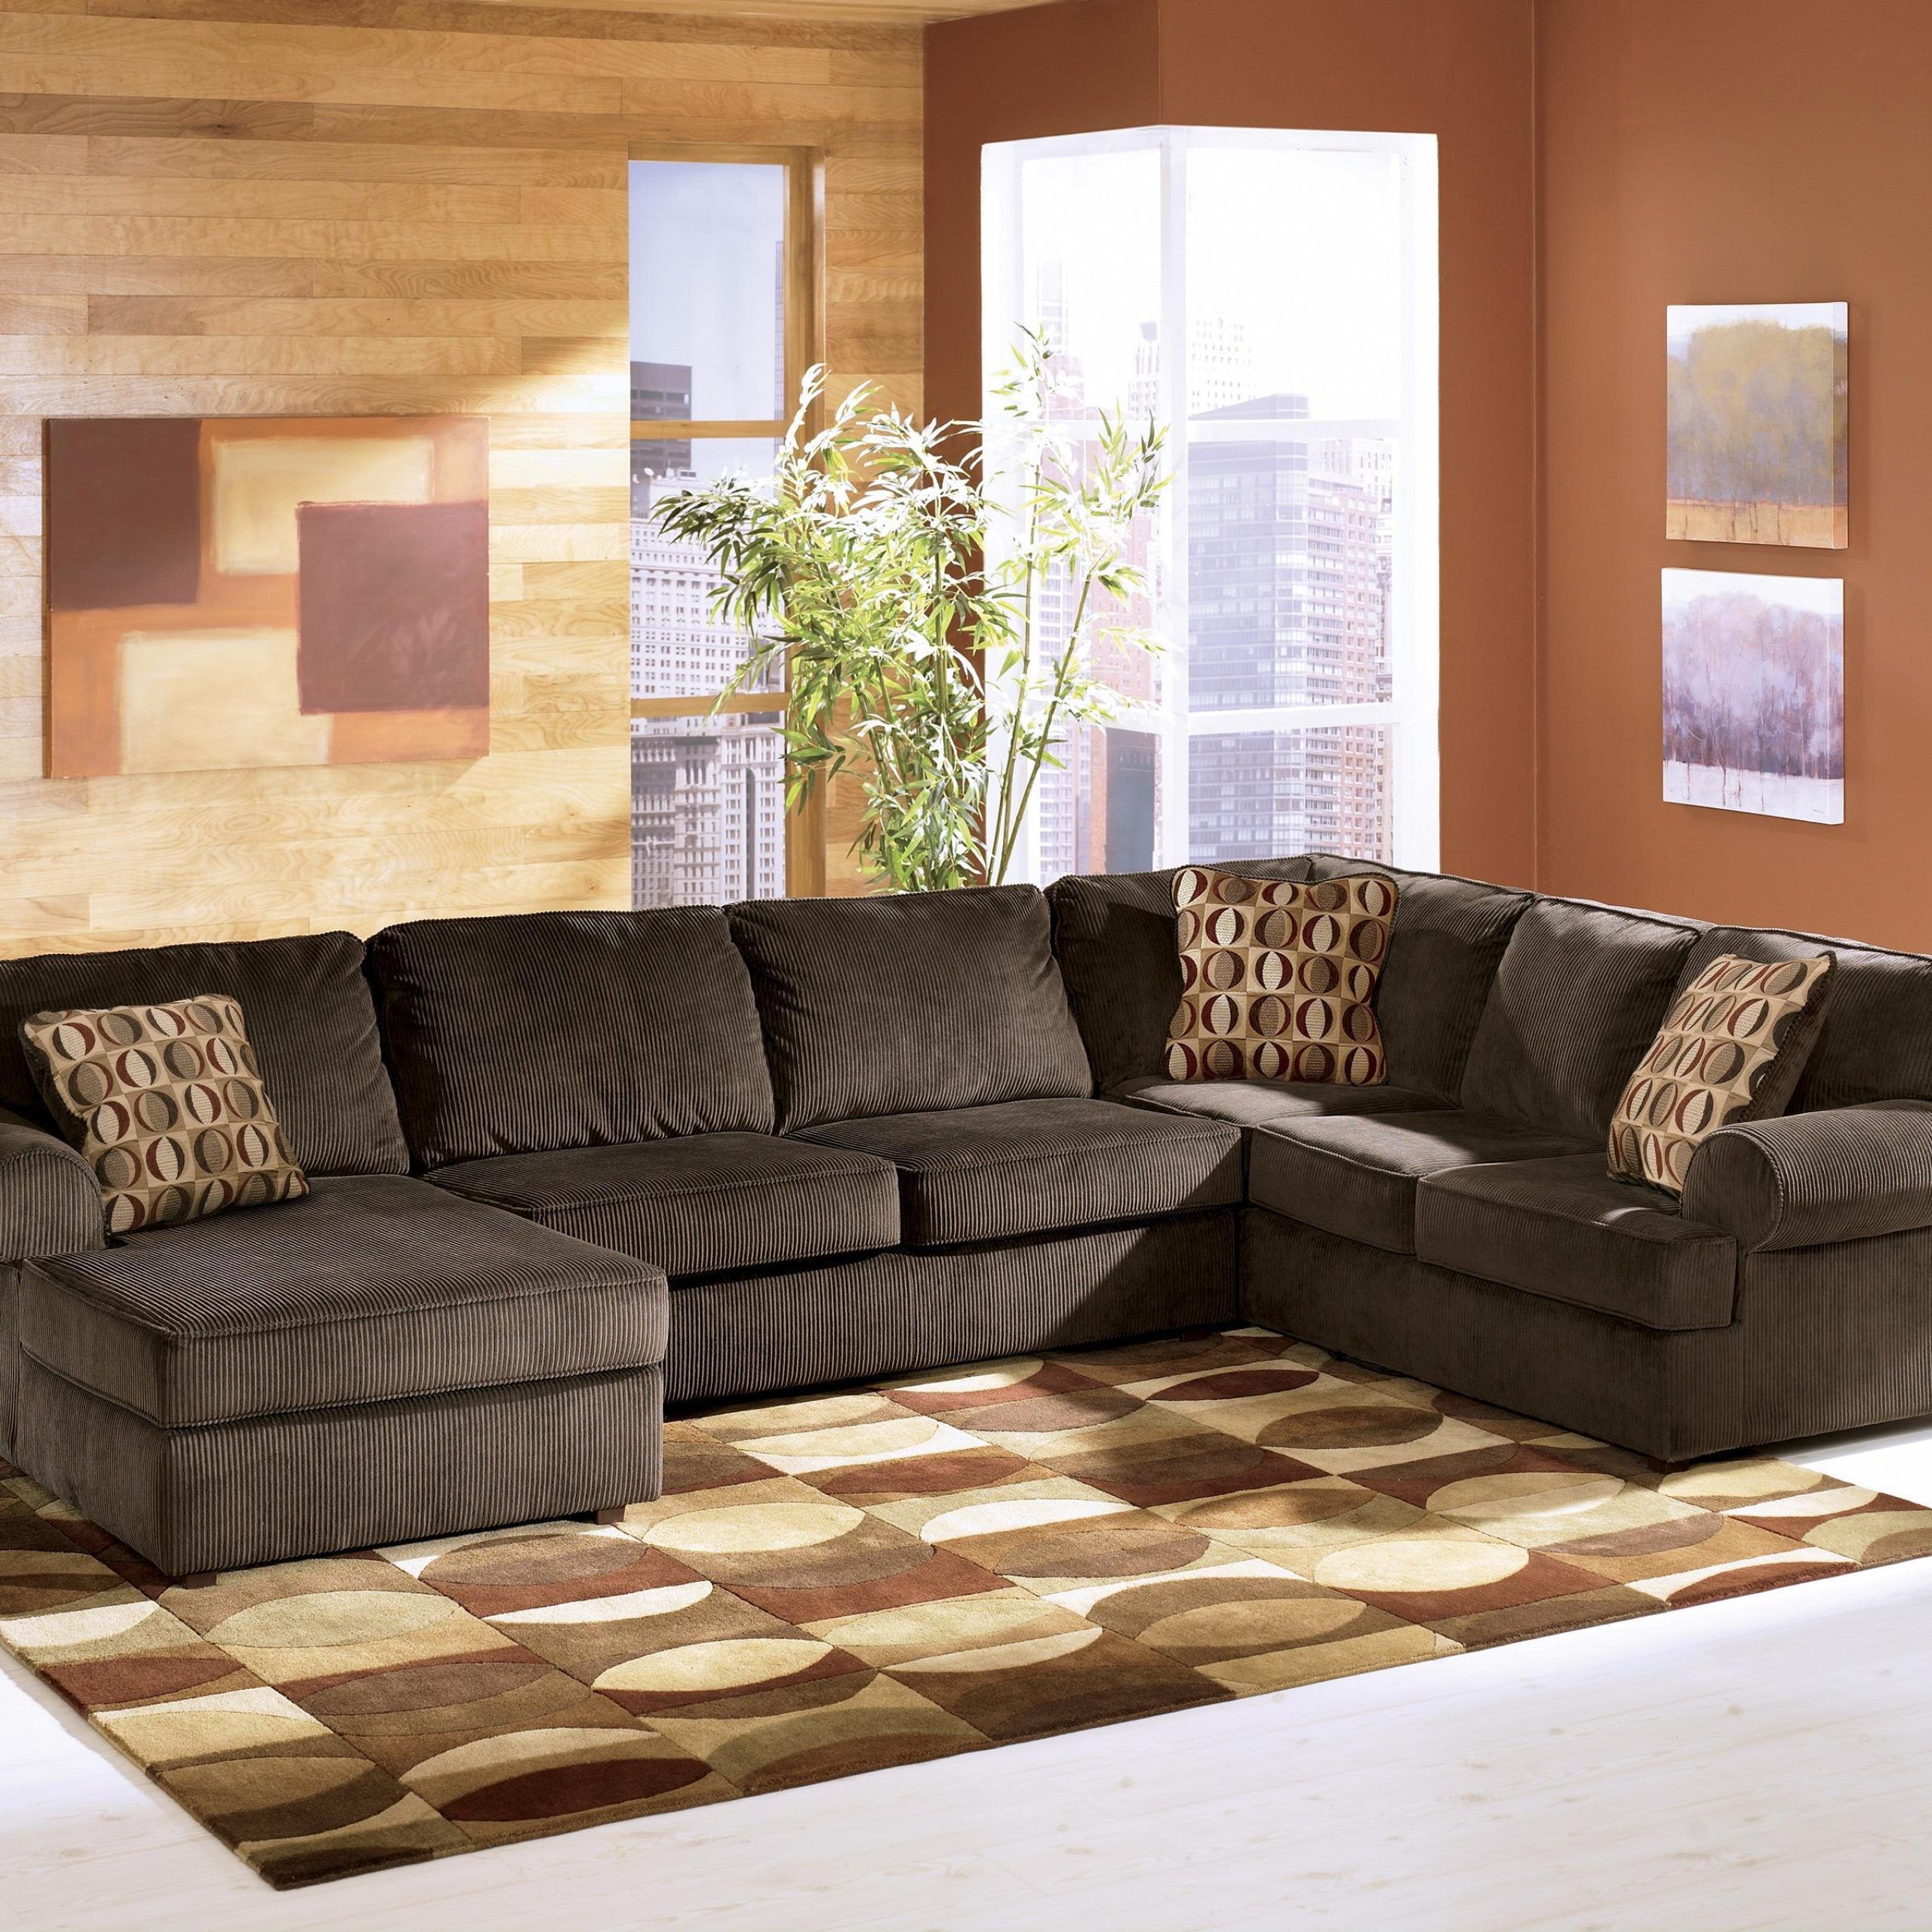 Ashley Furniture Vista – Chocolate Casual 3 Piece Sectional With Left Within Sofas In Chocolate Brown (Gallery 4 of 20)